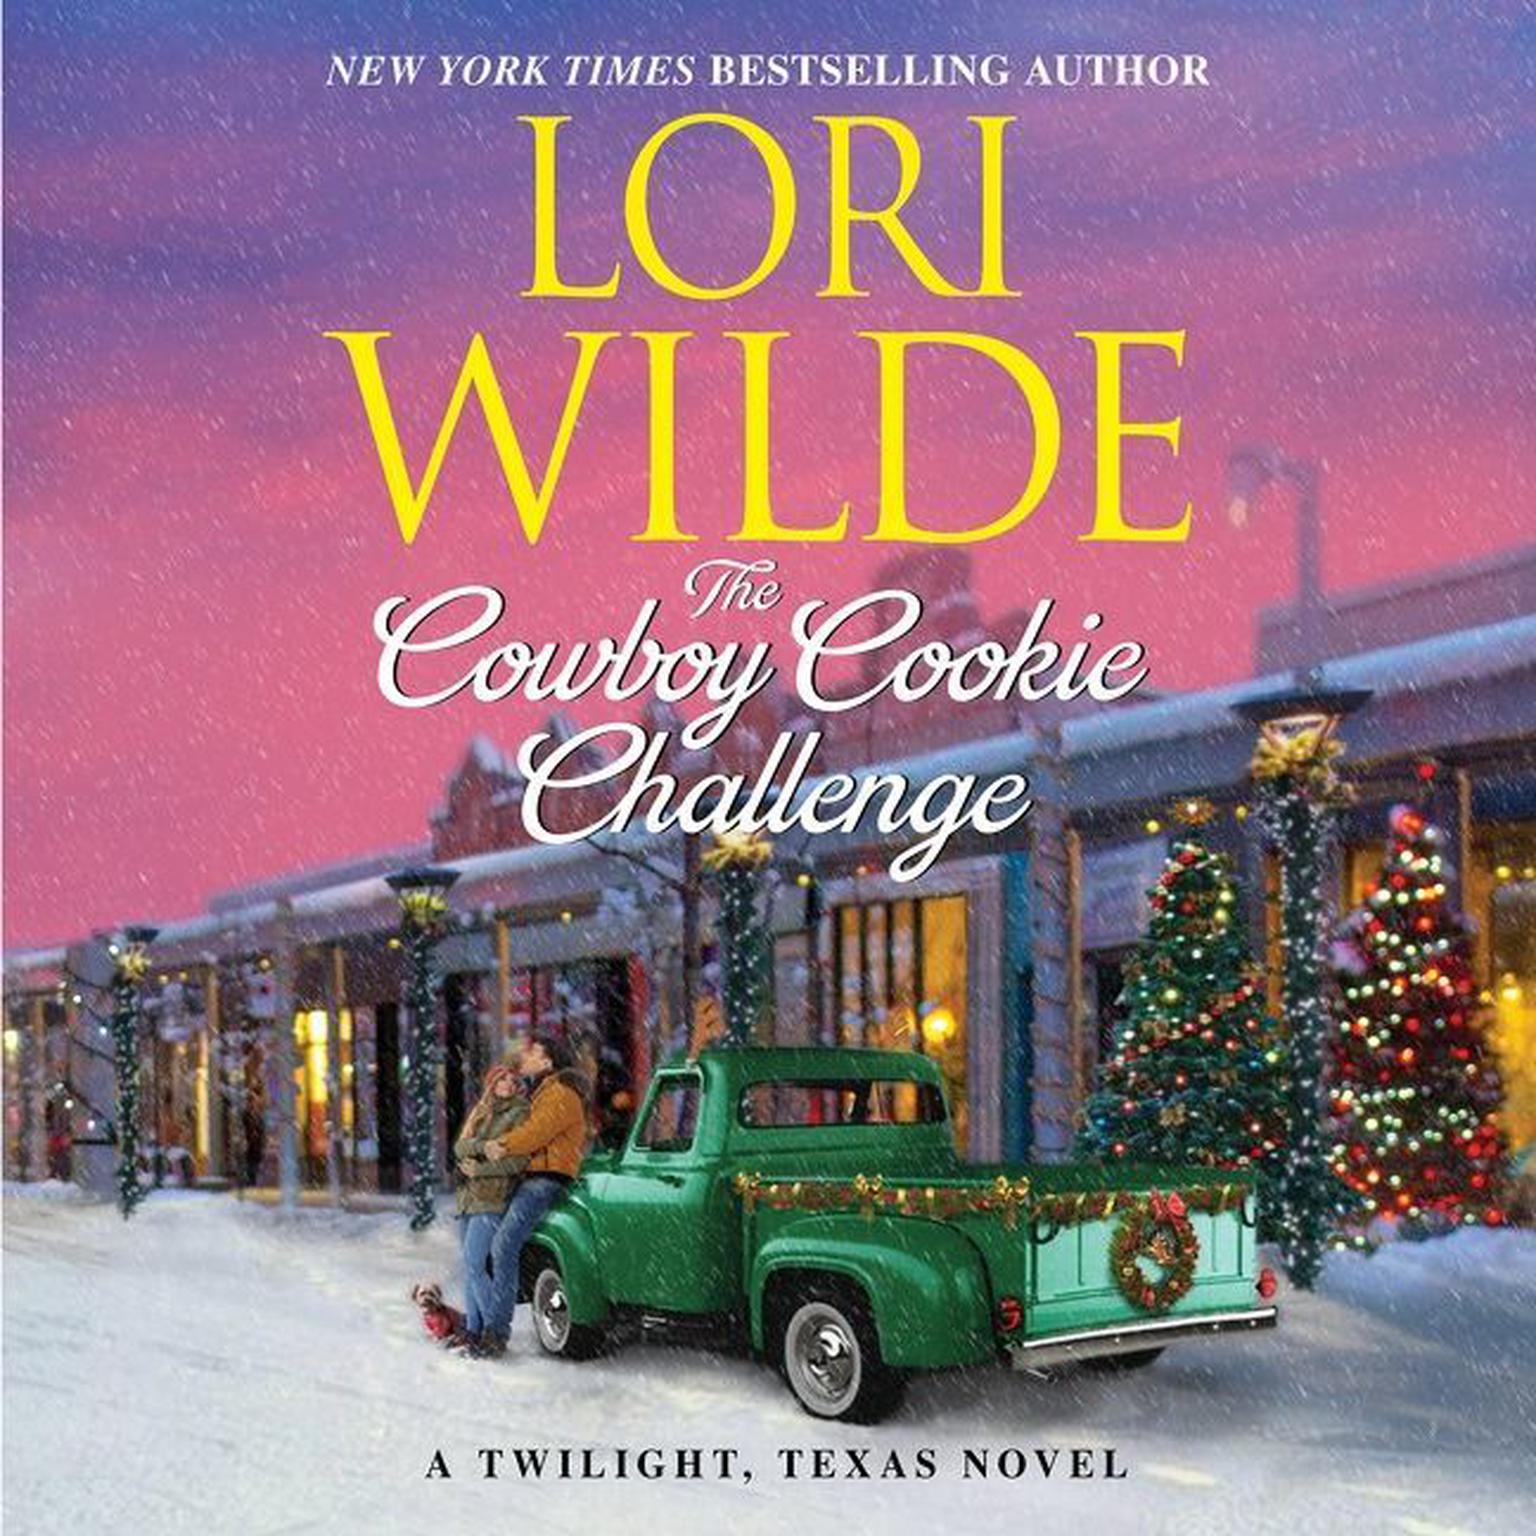 The Cowboy Cookie Challenge: A Twilight, Texas Novel Audiobook, by Lori Wilde